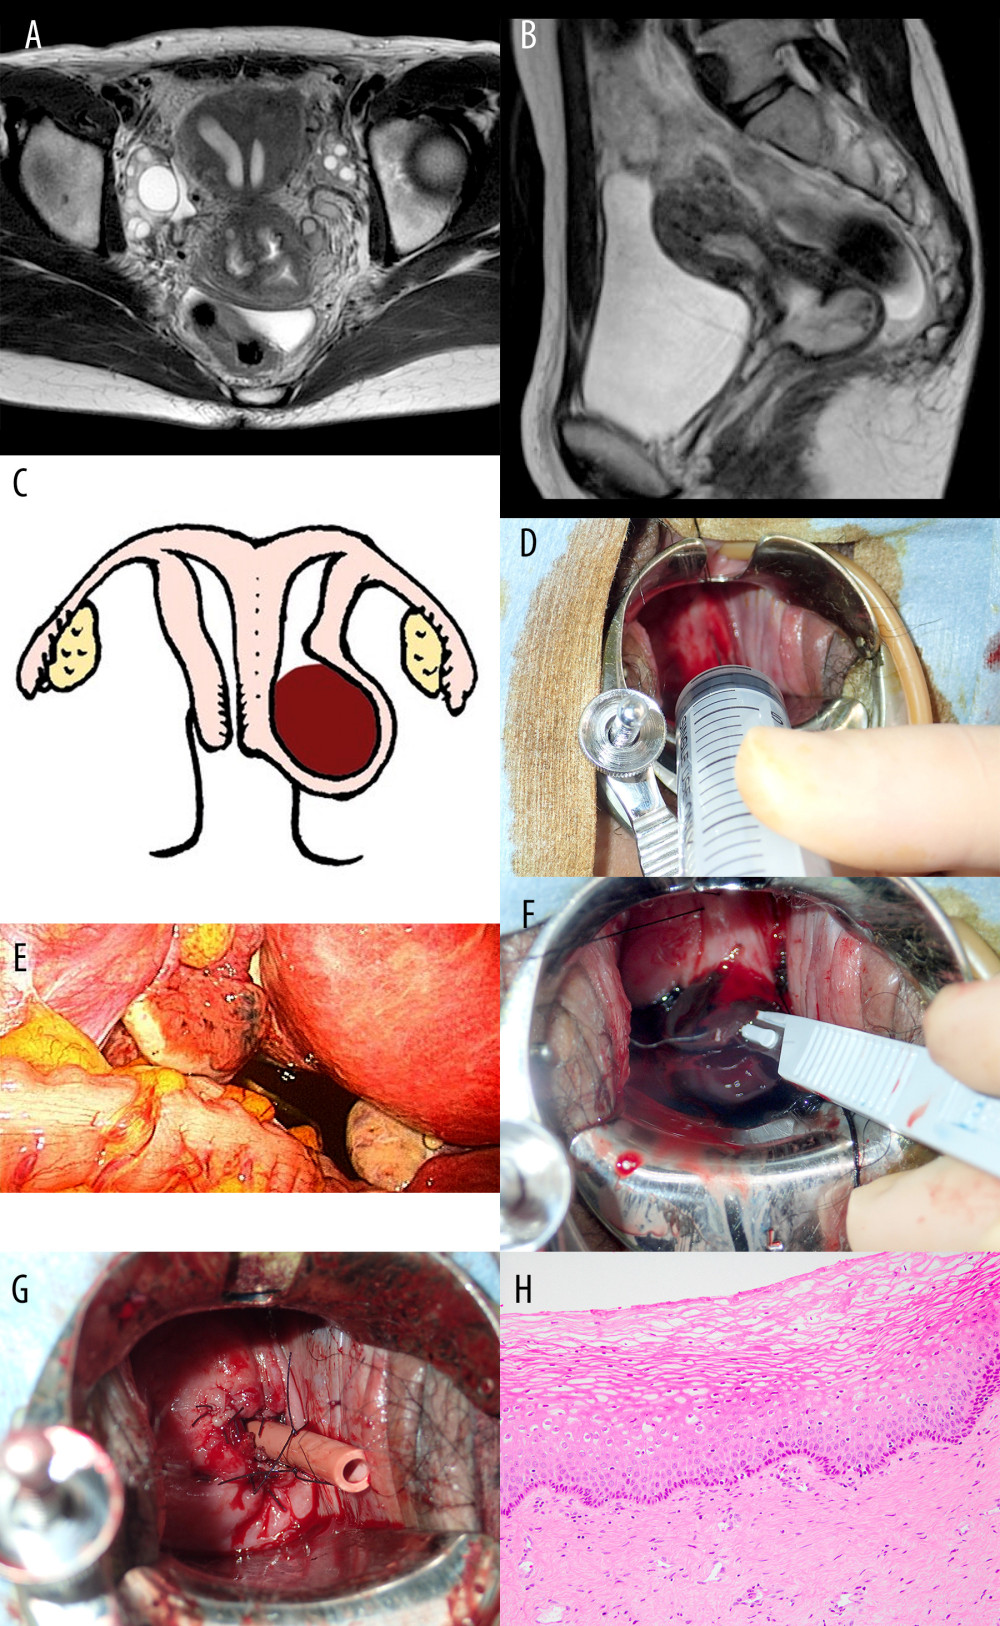 (Case 4). (A) MRI findings (T2-weighted imaging, axial plane): Duplicated uterus was observed. (B) MRI, sagittal plane: A hemorrhagic cyst was observed in the uterine cervix of the affected side. (C) Schematic representation of the genital organs seen in Case 4. (D) Exploratory puncture was performed at the site where the uterine cervical cyst was expected, and indigo carmine was injected. (E) Pigment outflow was laparoscopically observed from the left tubal fimbriae, thereby confirming that the puncture site had entered the uterine cavity of the affected side. (F) Spreading of the puncture site with a scalpel. (G) Insertion of a large Nelaton catheter to prevent restenosis. (H) Histology of the fenestrated vaginal wall, composed of stratified squamous epithelium.